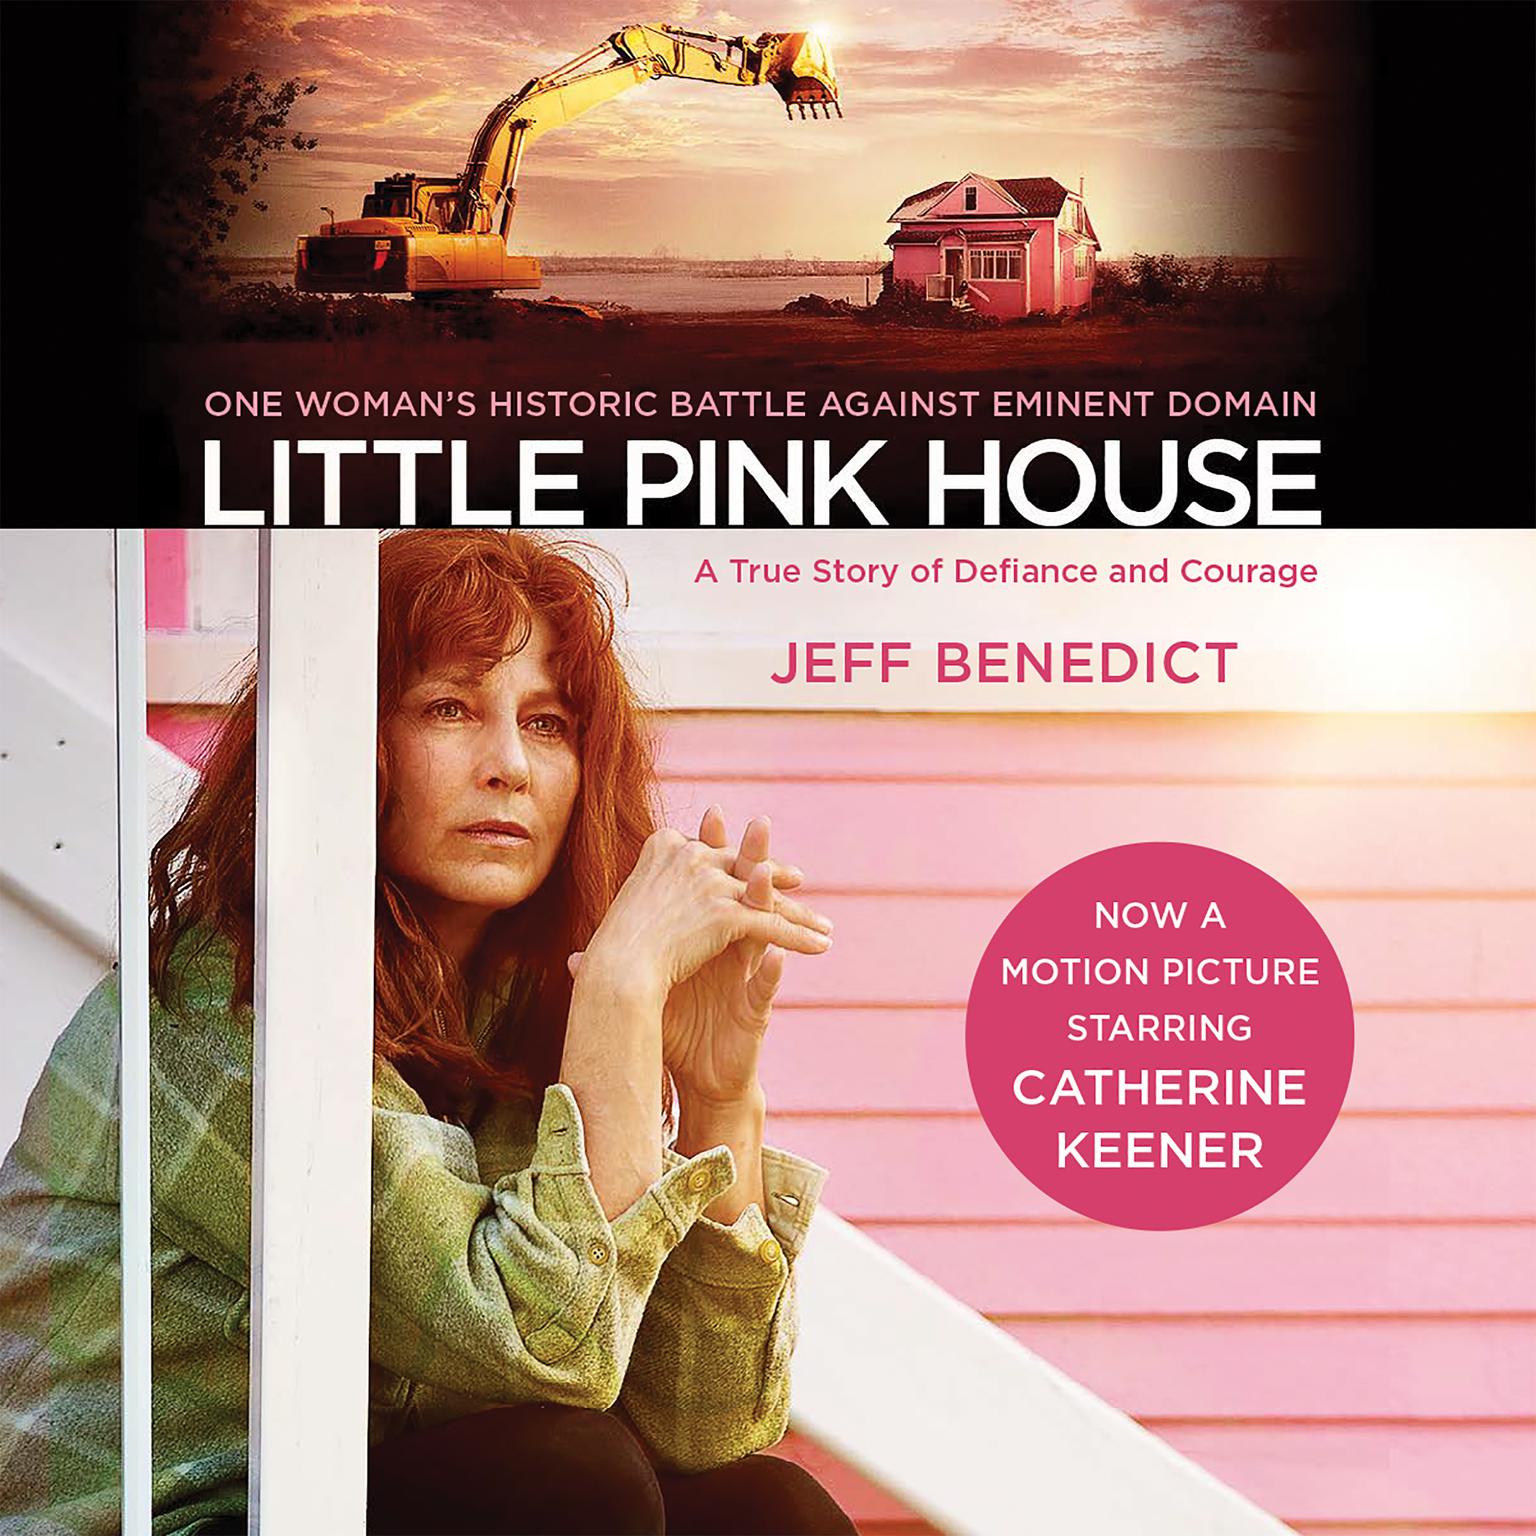 Little Pink House (Abridged): A True Story of Defiance and Courage Audiobook, by Jeff Benedict